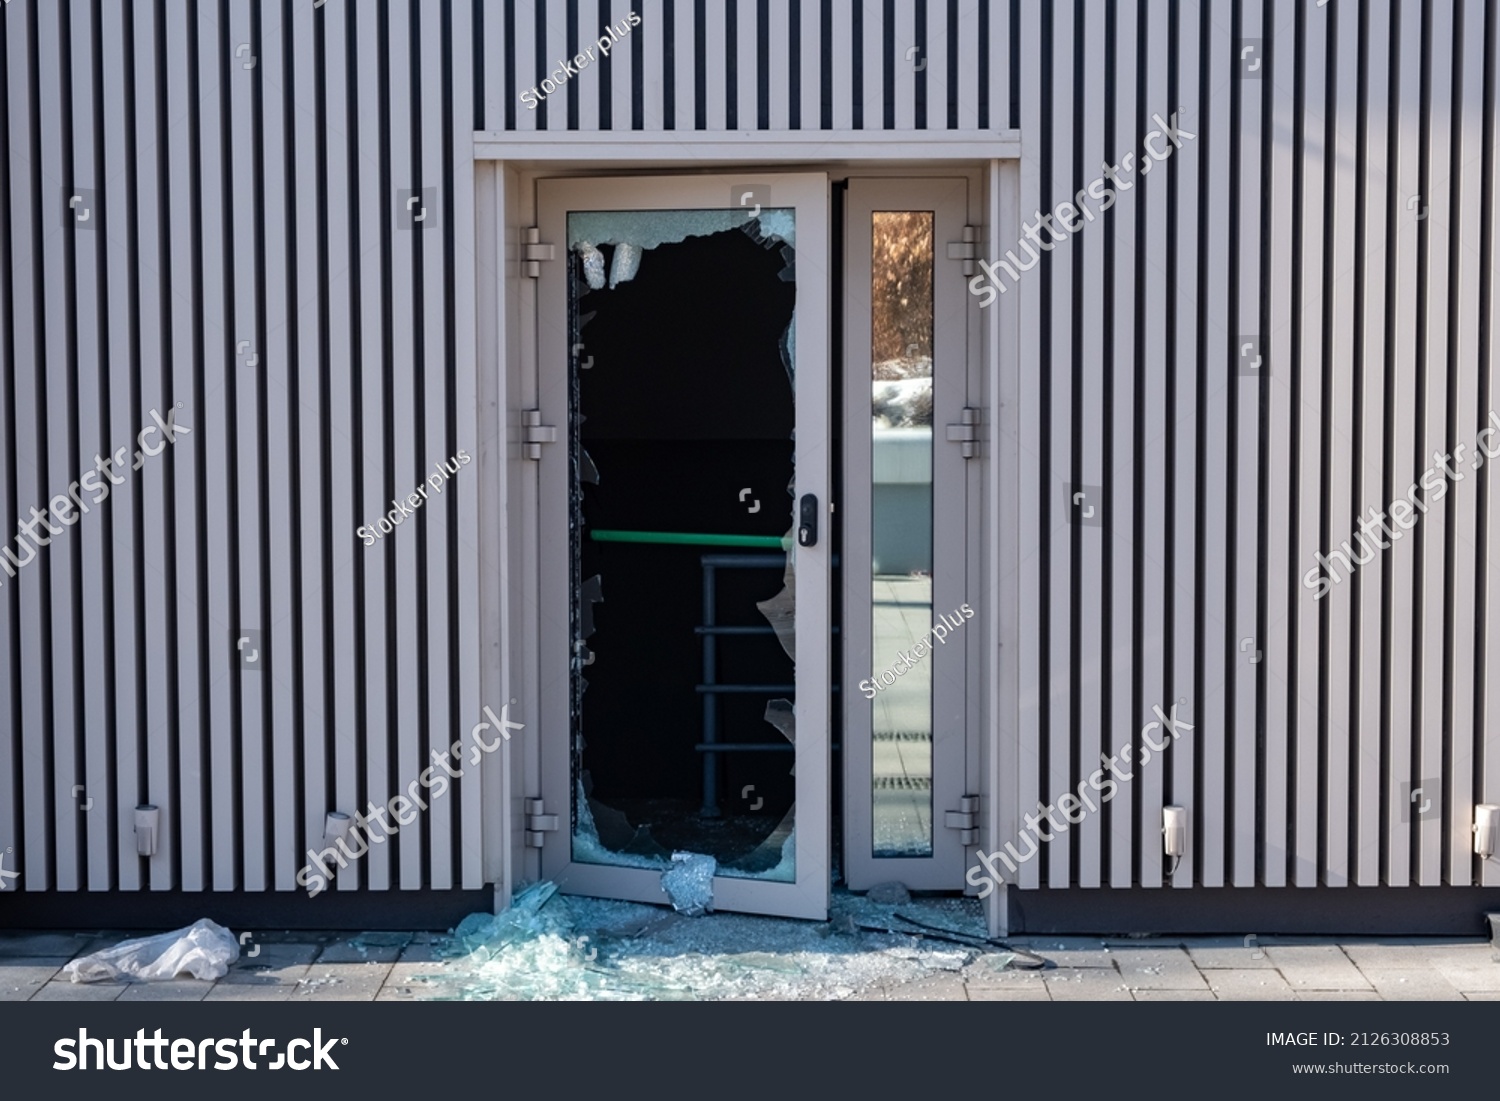 Broken glass door in shopping mall. Vandalism, burglary concept. Insurance concept. Cracked glass due to crime, robbery of shop concept. #2126308853